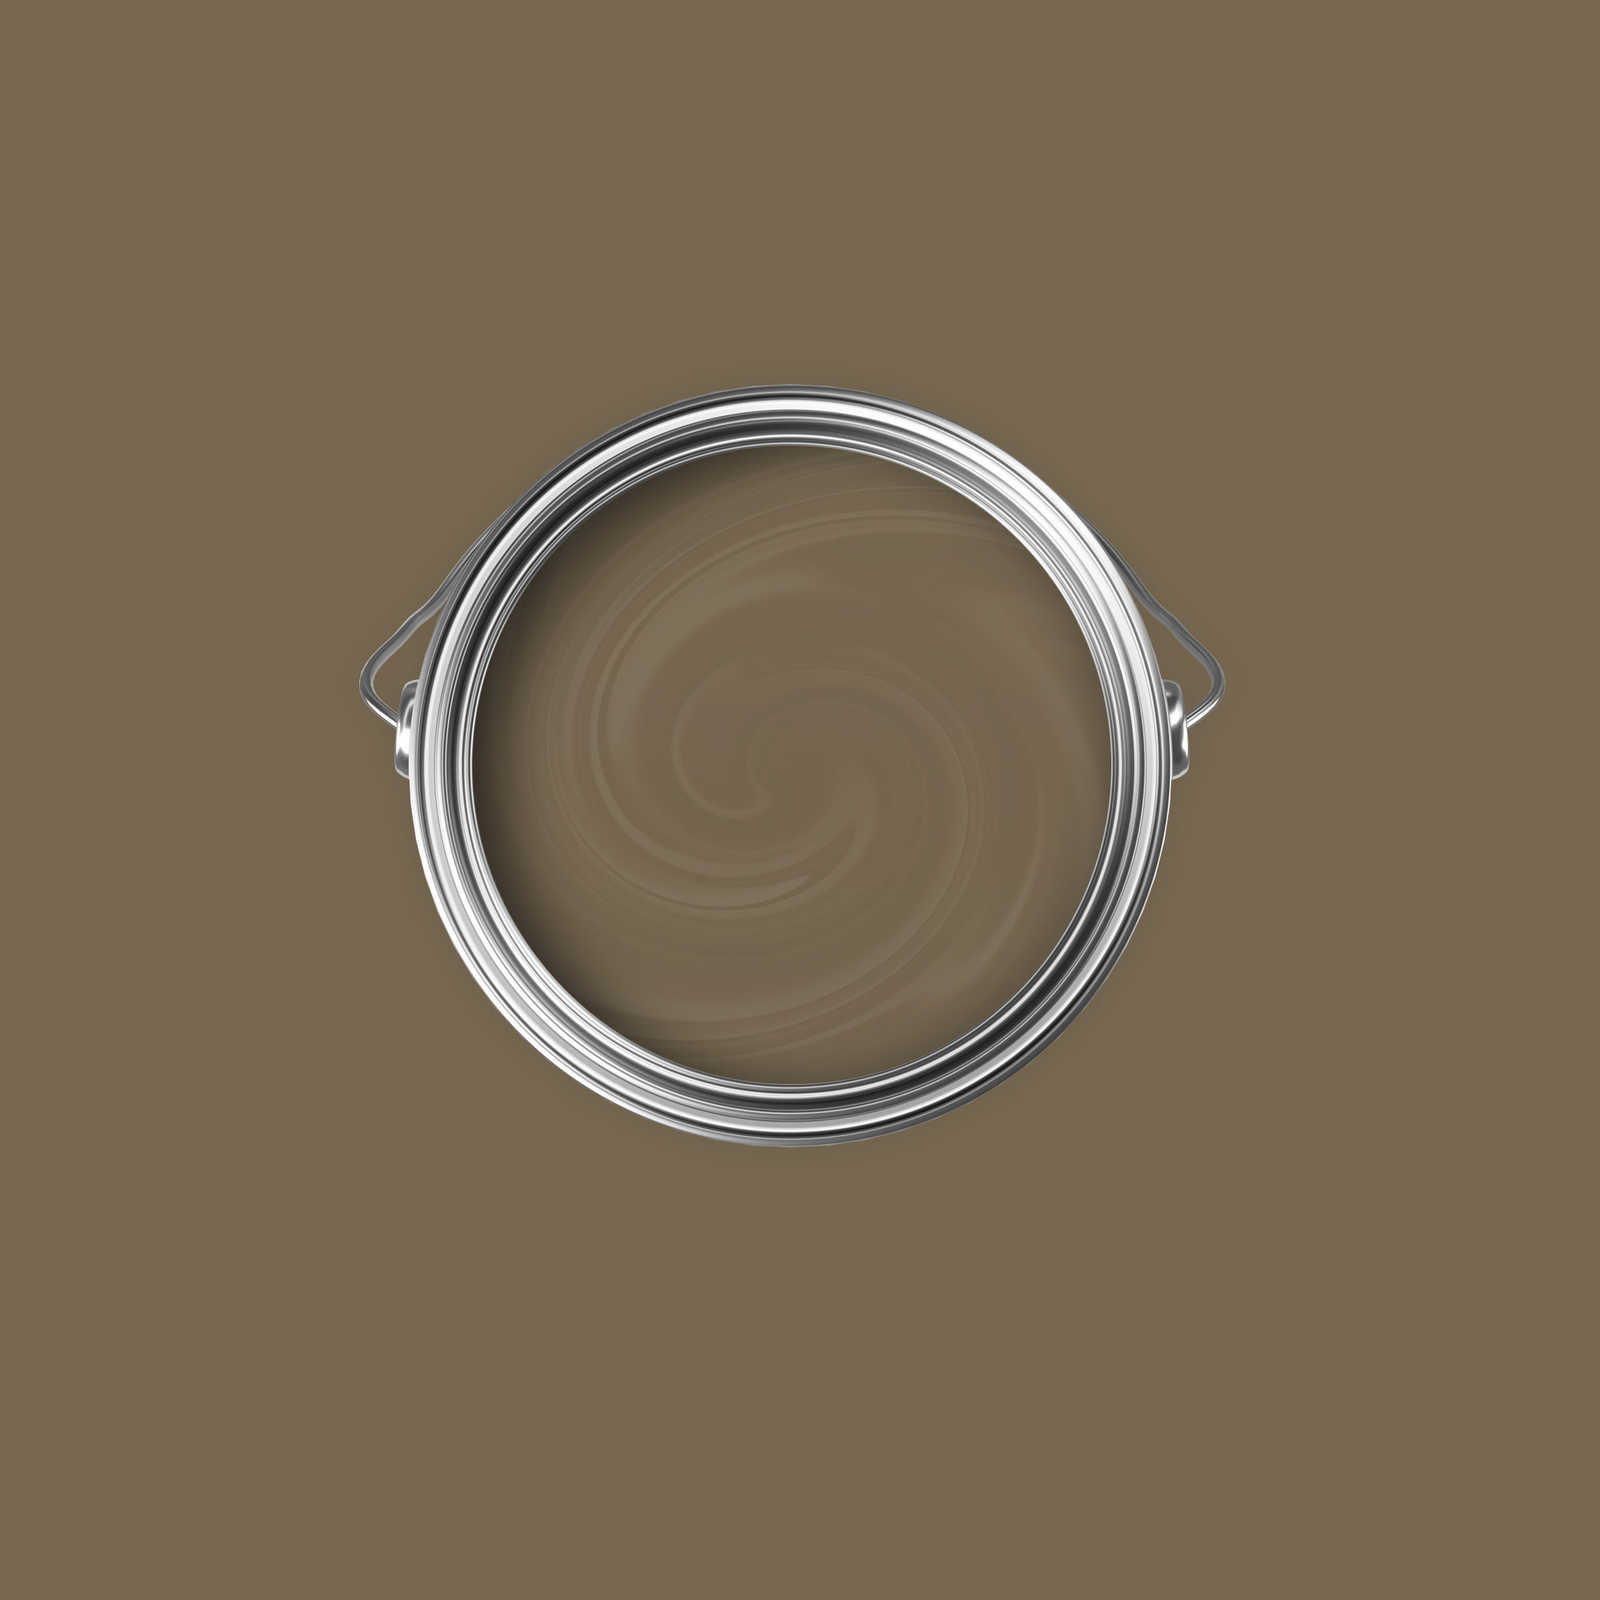             Premium Wall Paint Strong Khaki »Essential Earth« NW713 – 2.5 litre
        